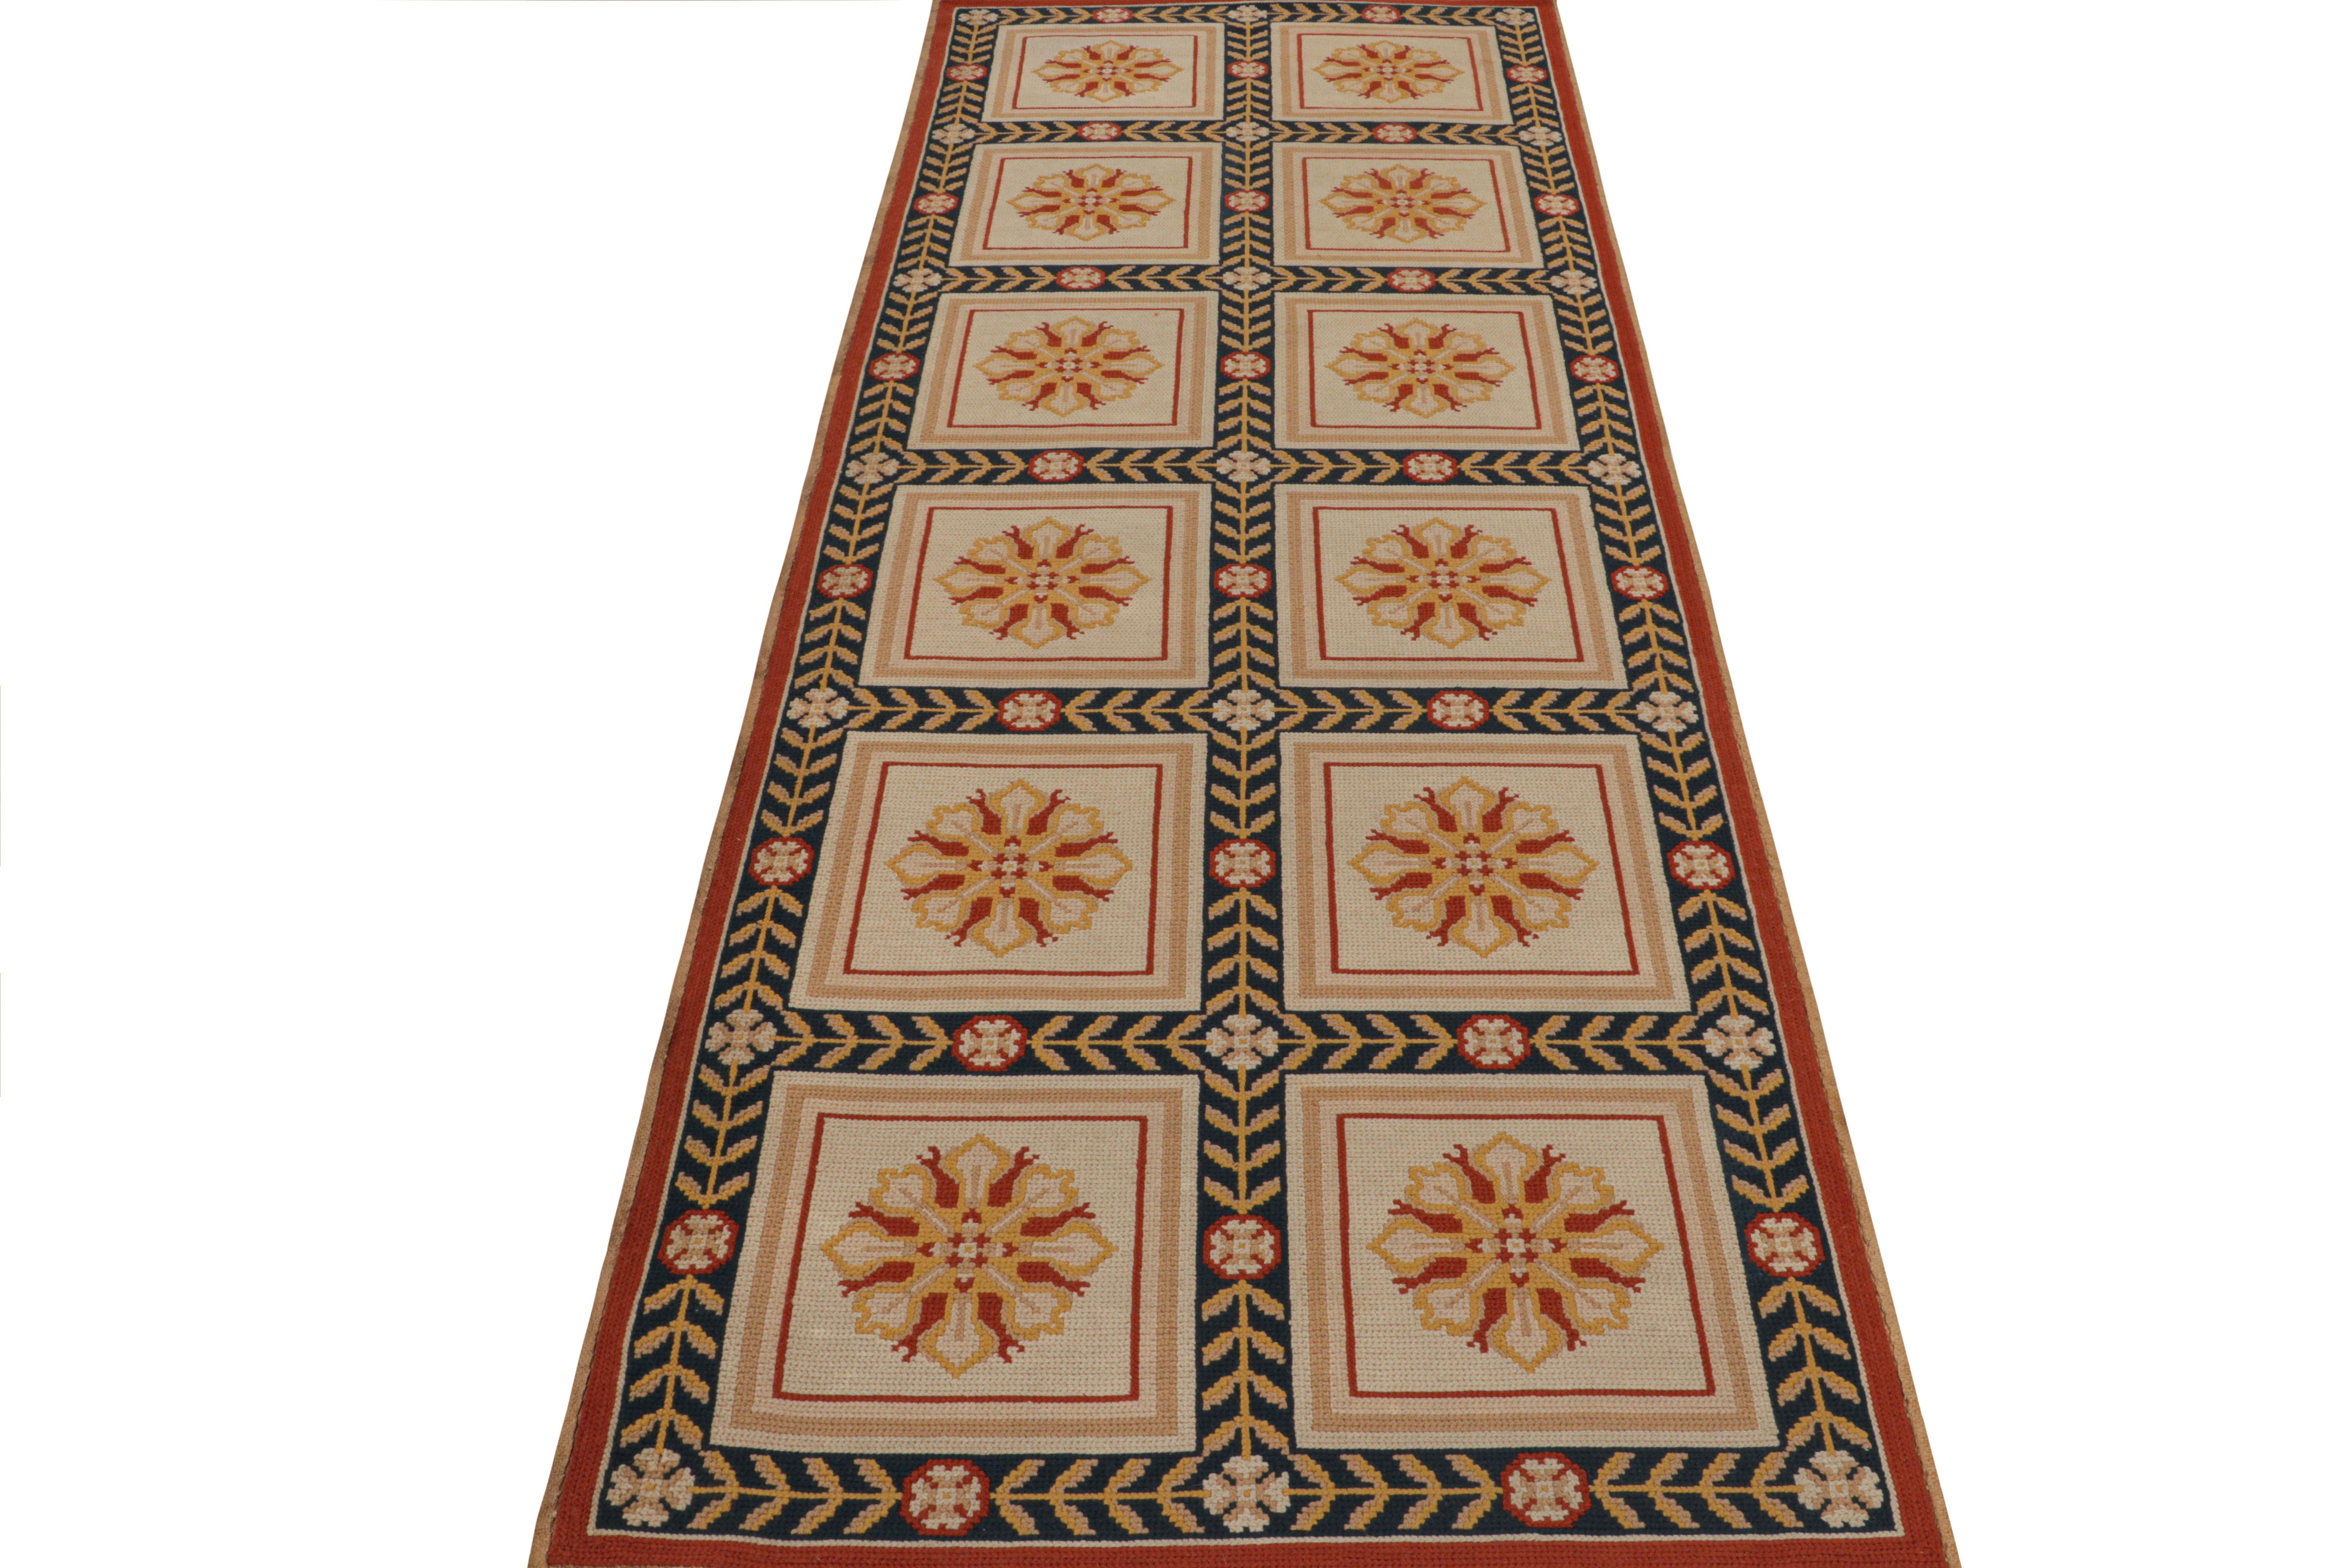 Portuguese Antique Arraiolos Needlepoint Runner With Floral Medallions, From Rug & Kilim For Sale